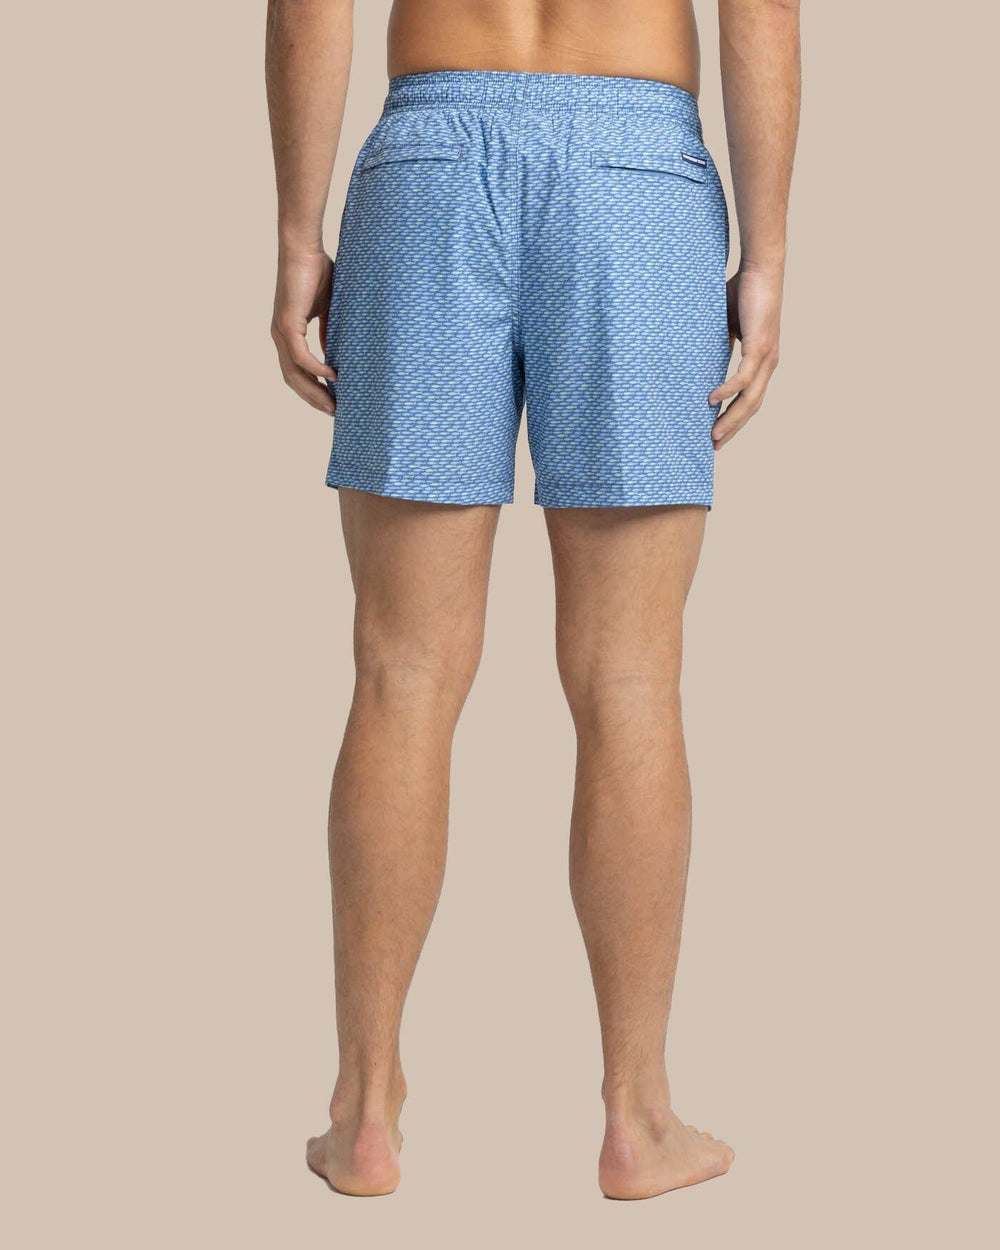 The back view of the Southern Tide Casual Water Swim Trunk by Southern Tide - Coronet Blue